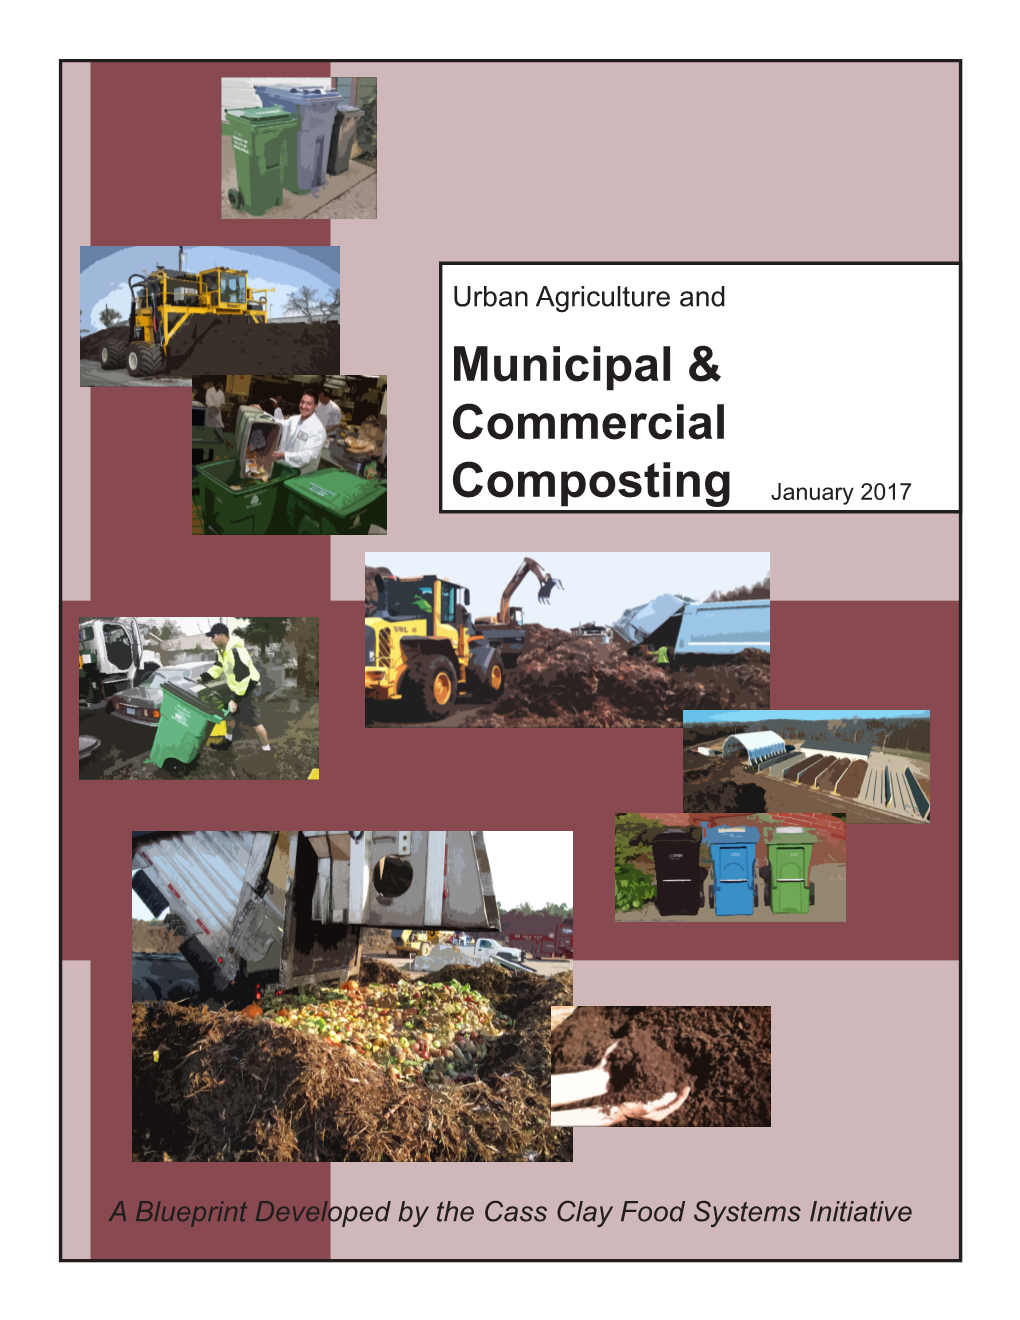 Municipal & Commercial Composting